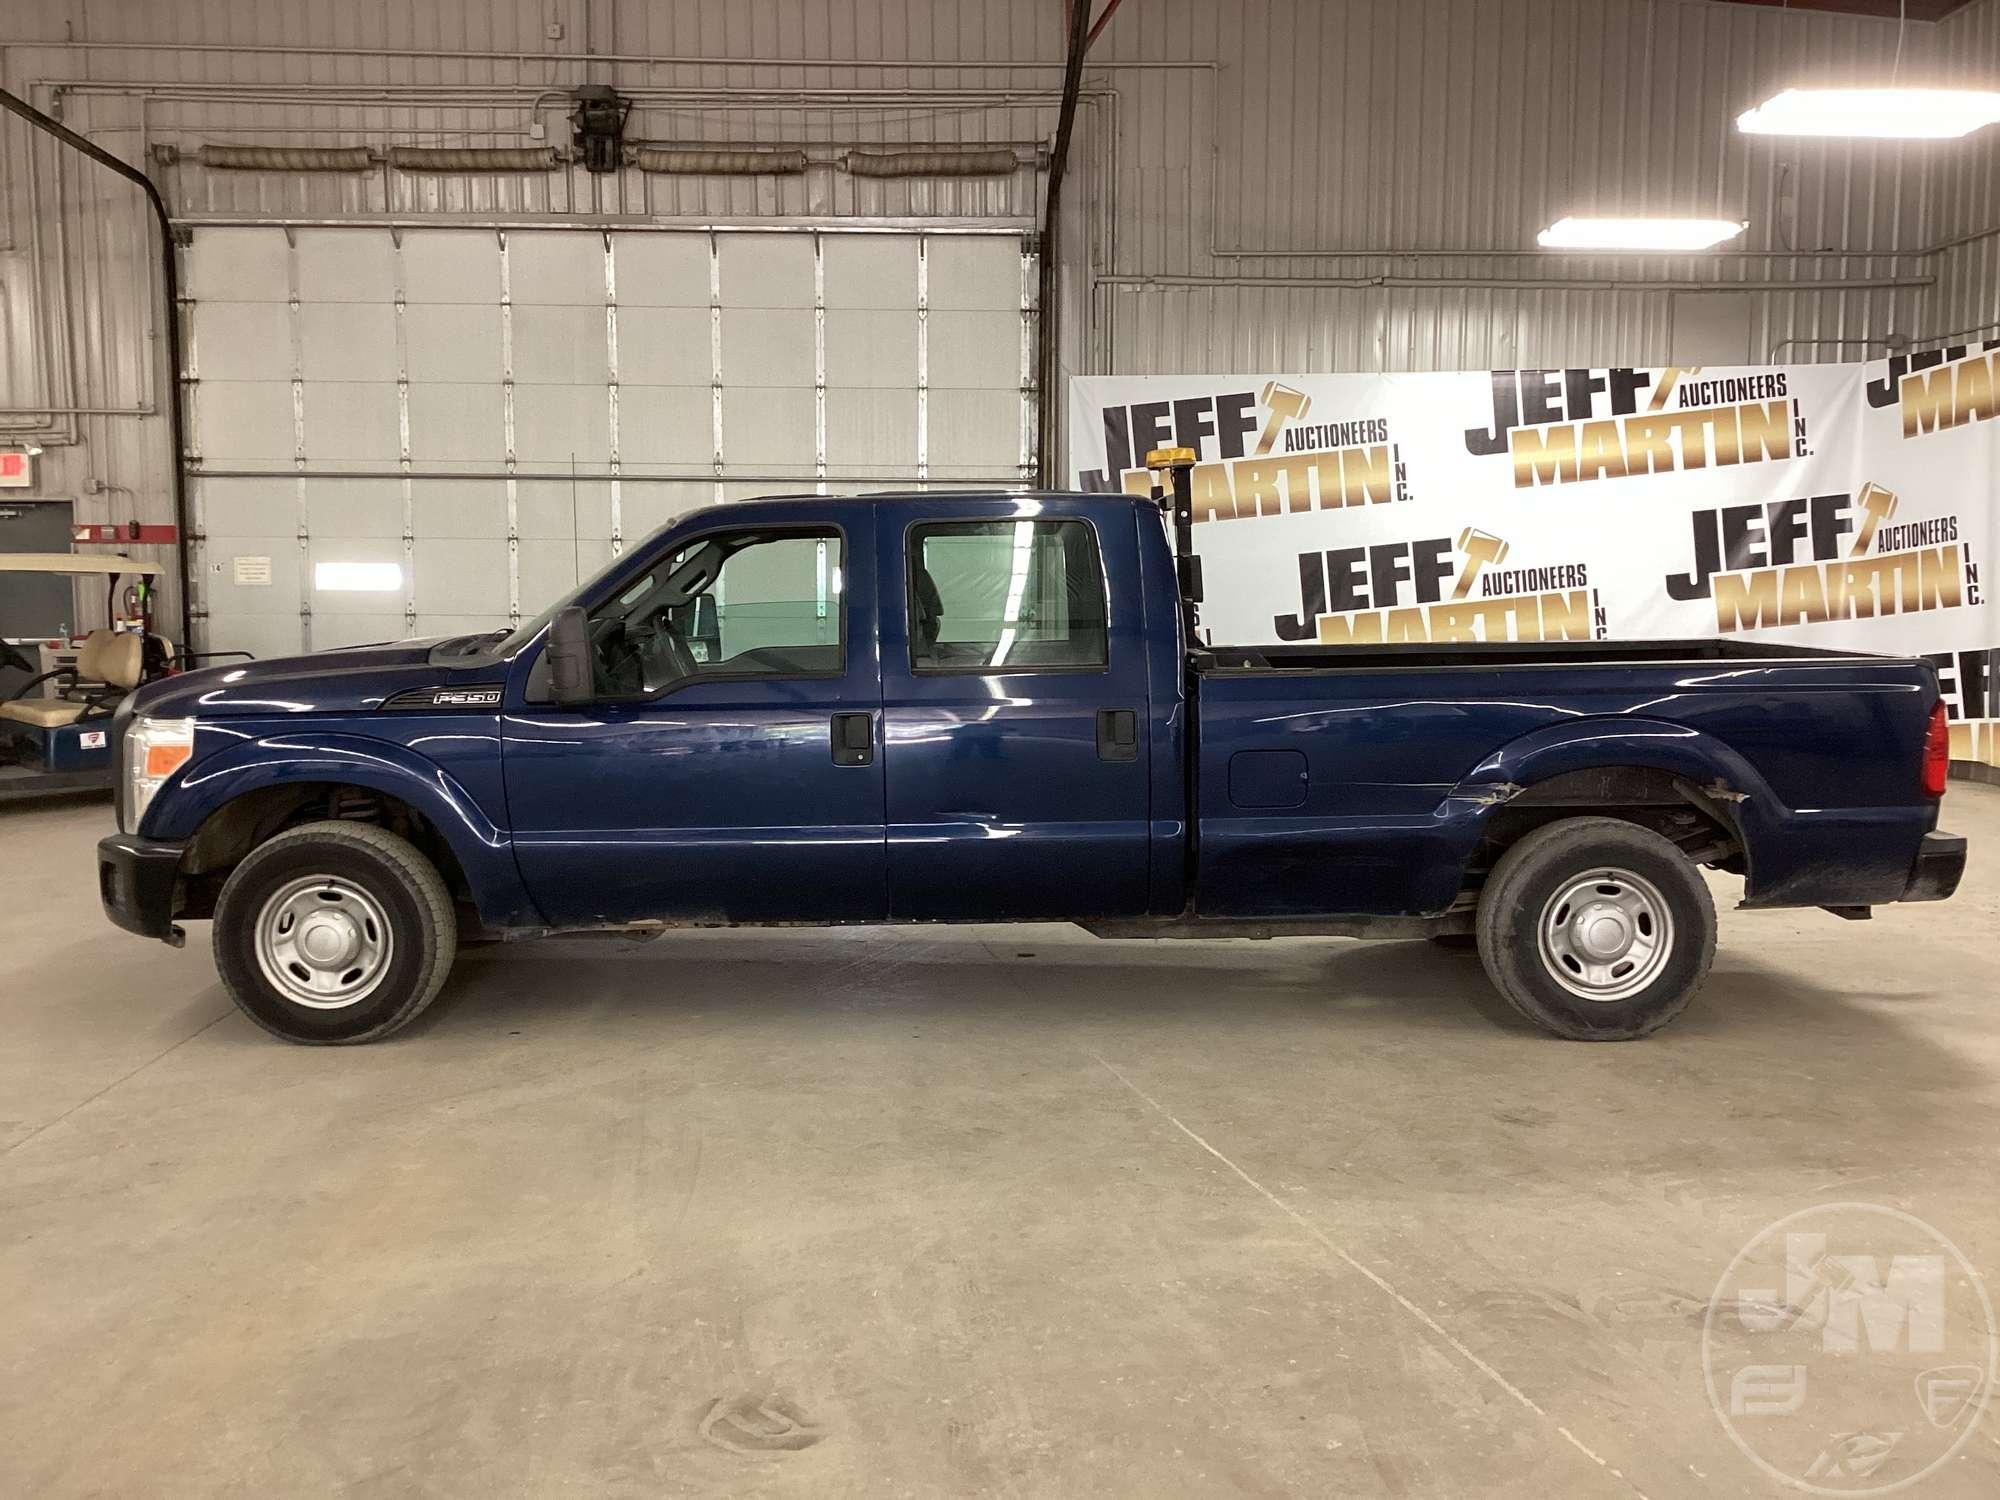 2011 FORD F-350 CREW CAB 1 TON TRUCK VIN: 1FT8W3A63BED11952